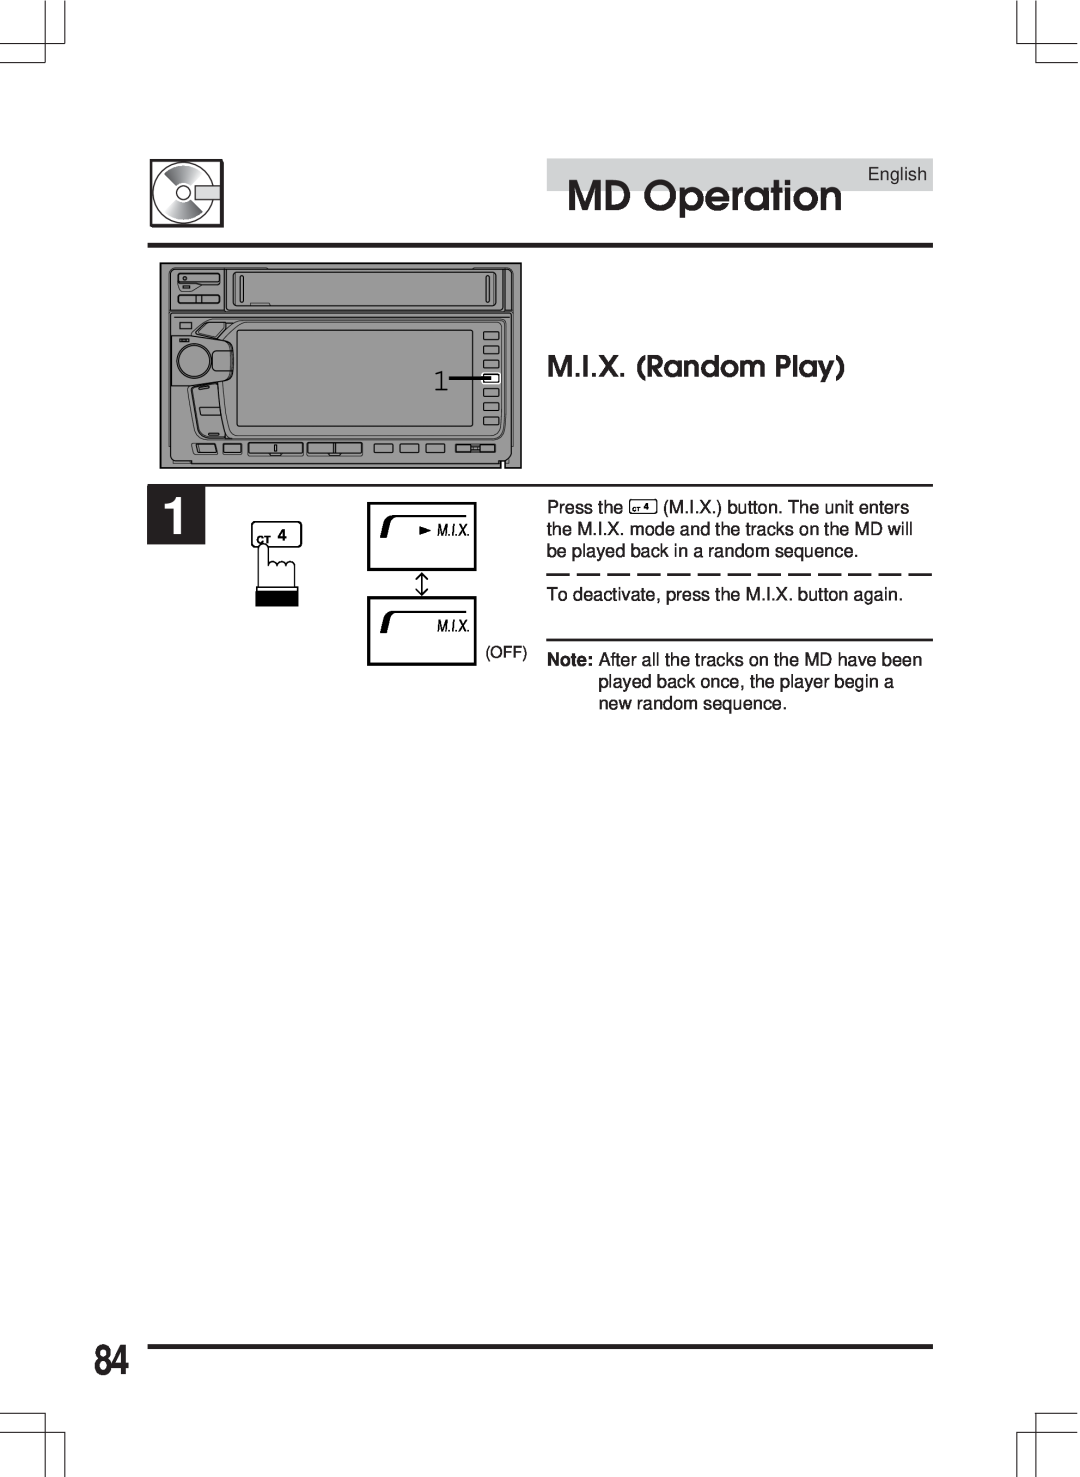 Alpine MDA-W890 owner manual MD Operation English, M.I.X. Random Play, Note After all the tracks on the MD have been 